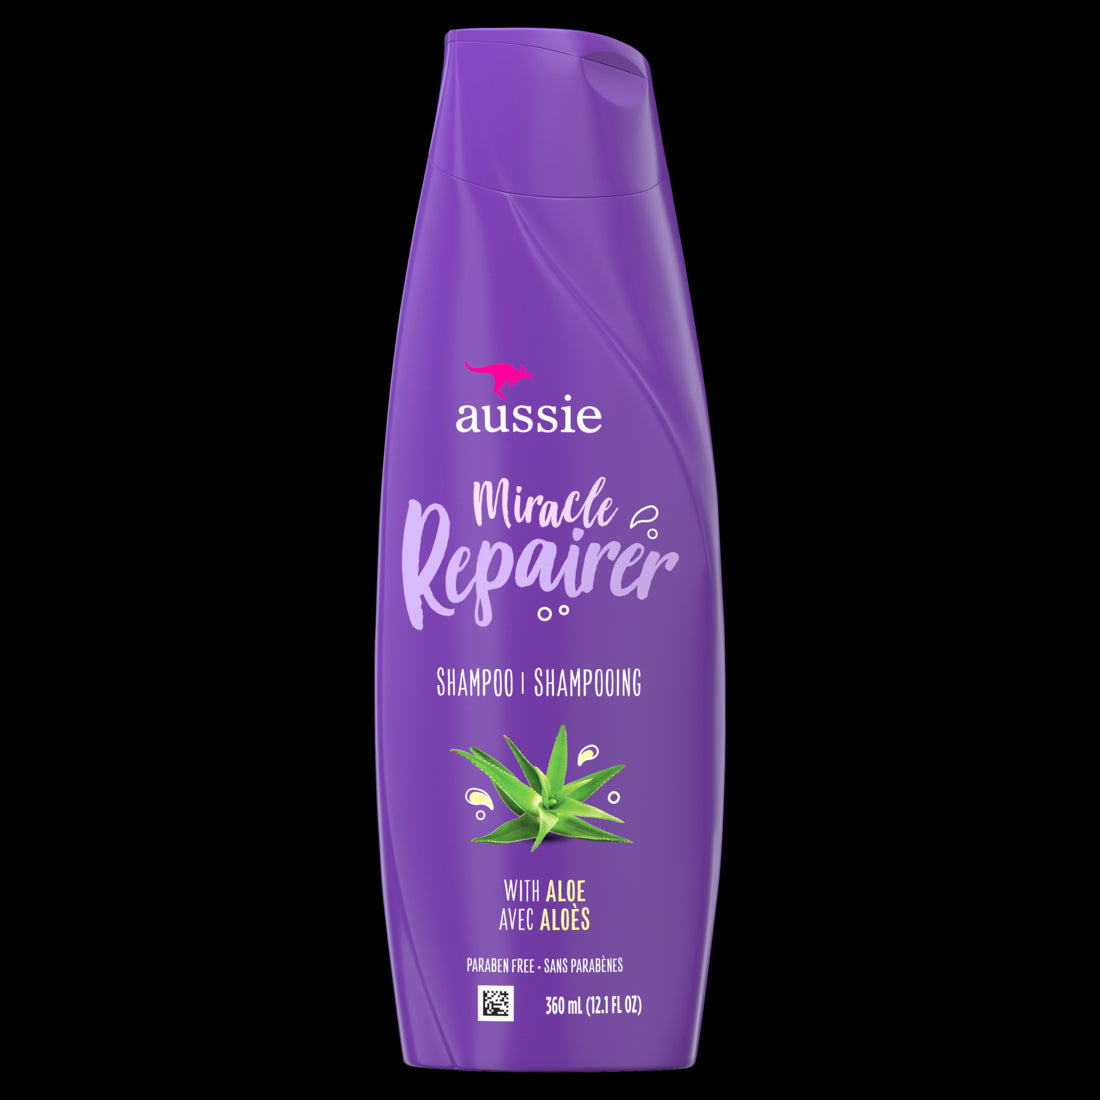 Aussie Miracle Repairer Shampoo with Aloe for All Hair Types - 12.1oz/6pk